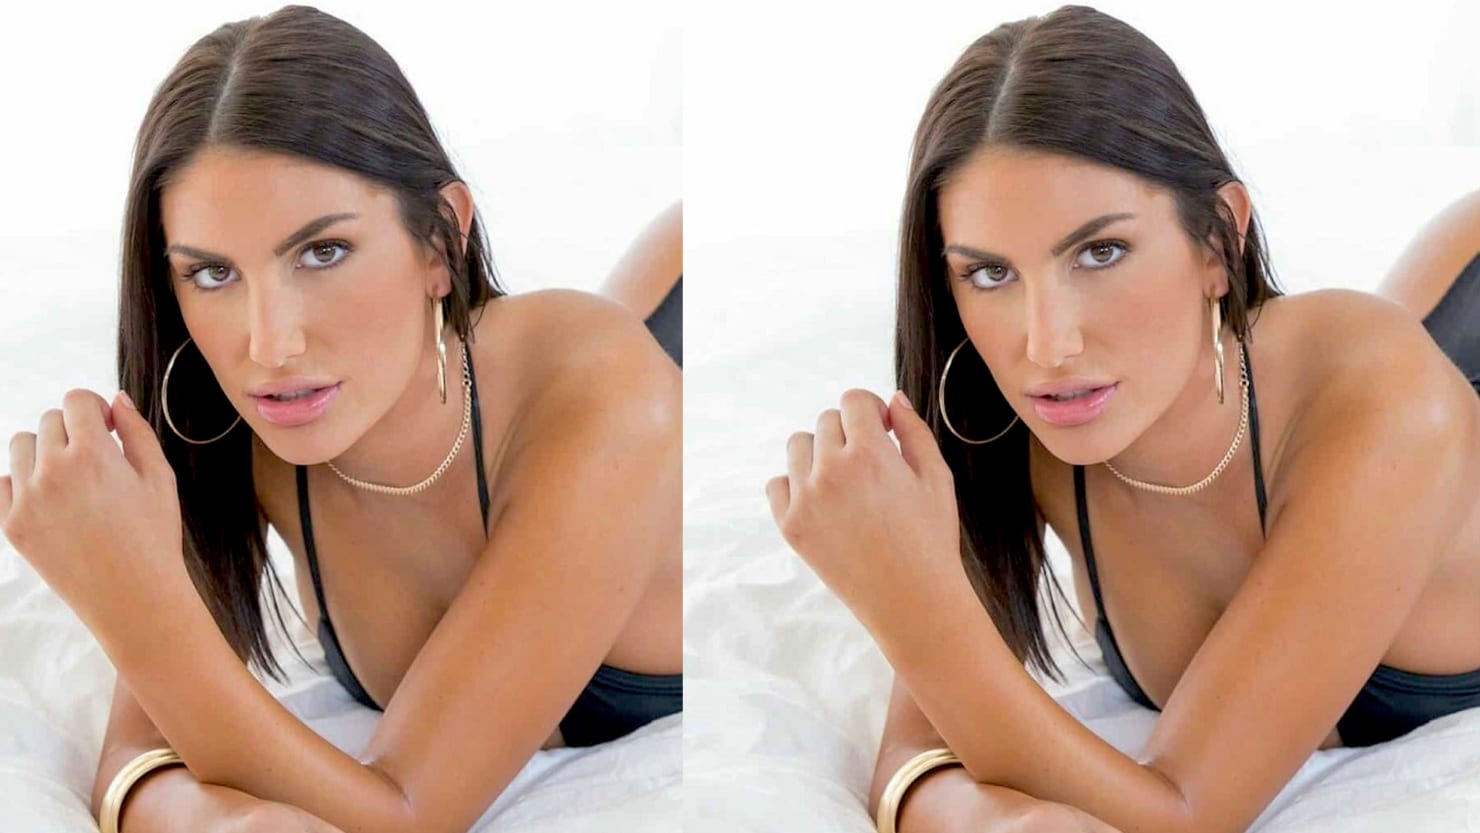 Father Fuck Young Daugther After Mothers Deaths Porn S - Mother of 'Cyberbullied' Porn Star August Ames Opens Up About Her Last Days